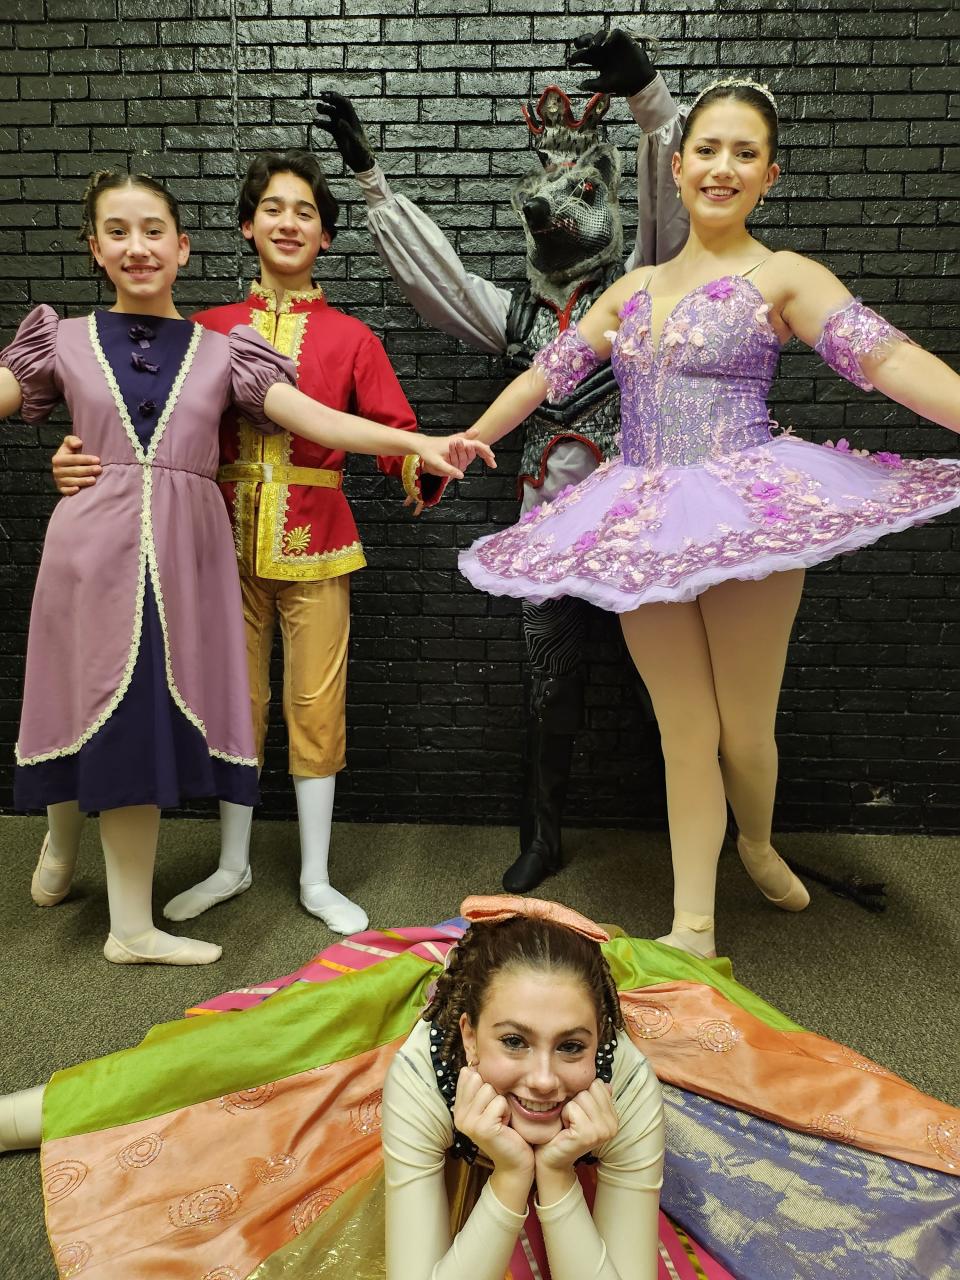 From left, Ariella Telles, portraying Clara; Jaxx Creek, portraying the Prince; Bryan Rushin, portraying the Rat King; Emily Evans, portraying the Sugar Plum Fairy; and Carmen Brown, portraying Jeune (floor) rehearse for the upcoming production of Lone Star Ballet's "The Nutcracker," to be held Dec. 8-10 at the Amarillo Civic Center Auditorium.